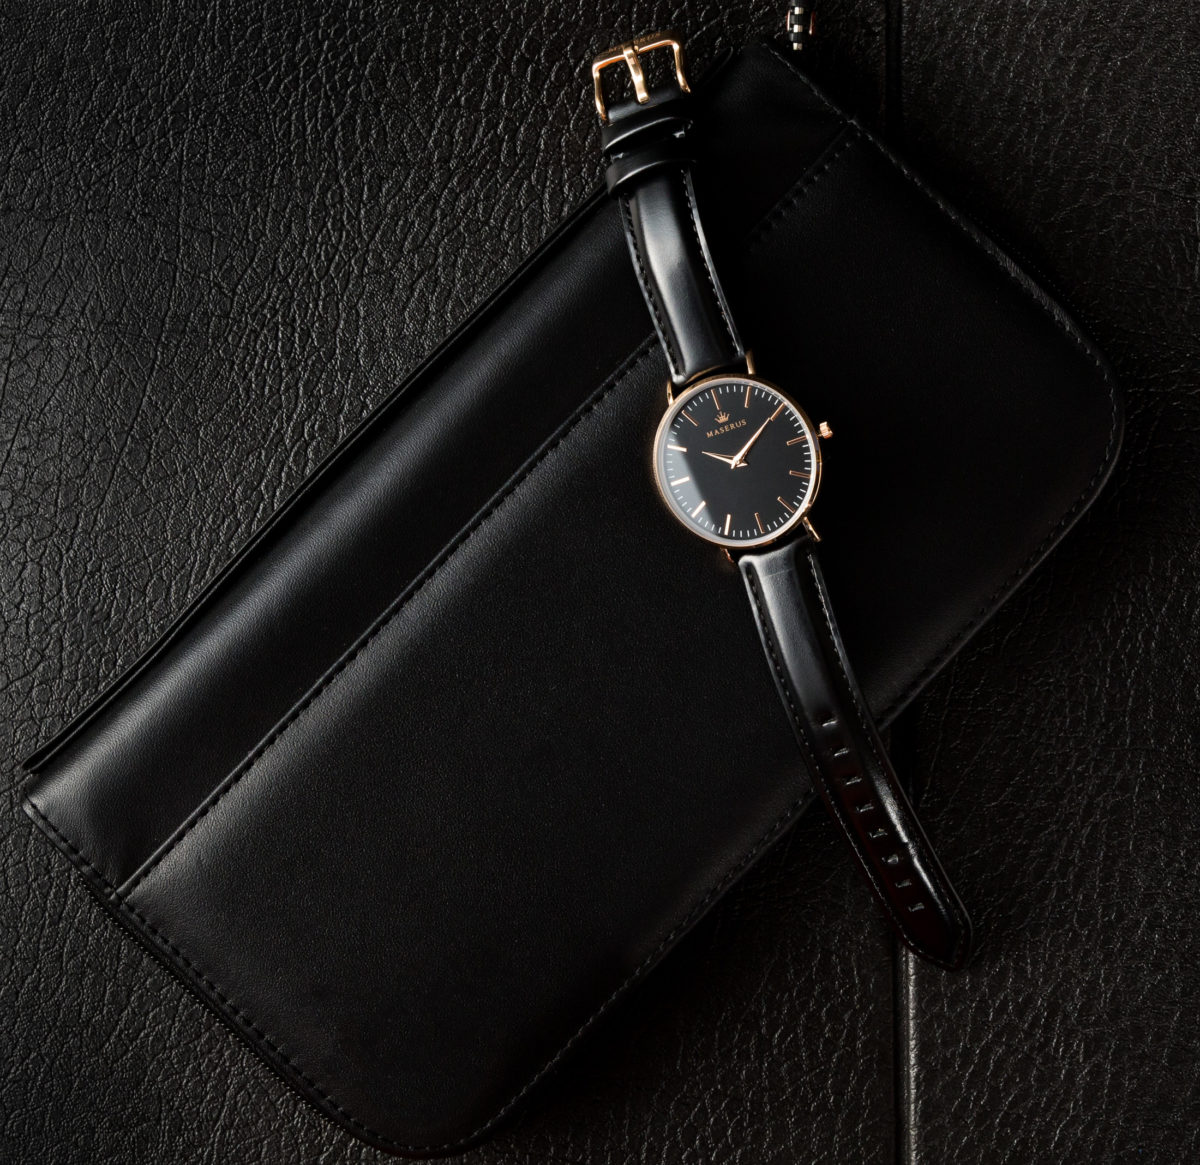 Product image one of womens rose gold, black leather strap watch on case.